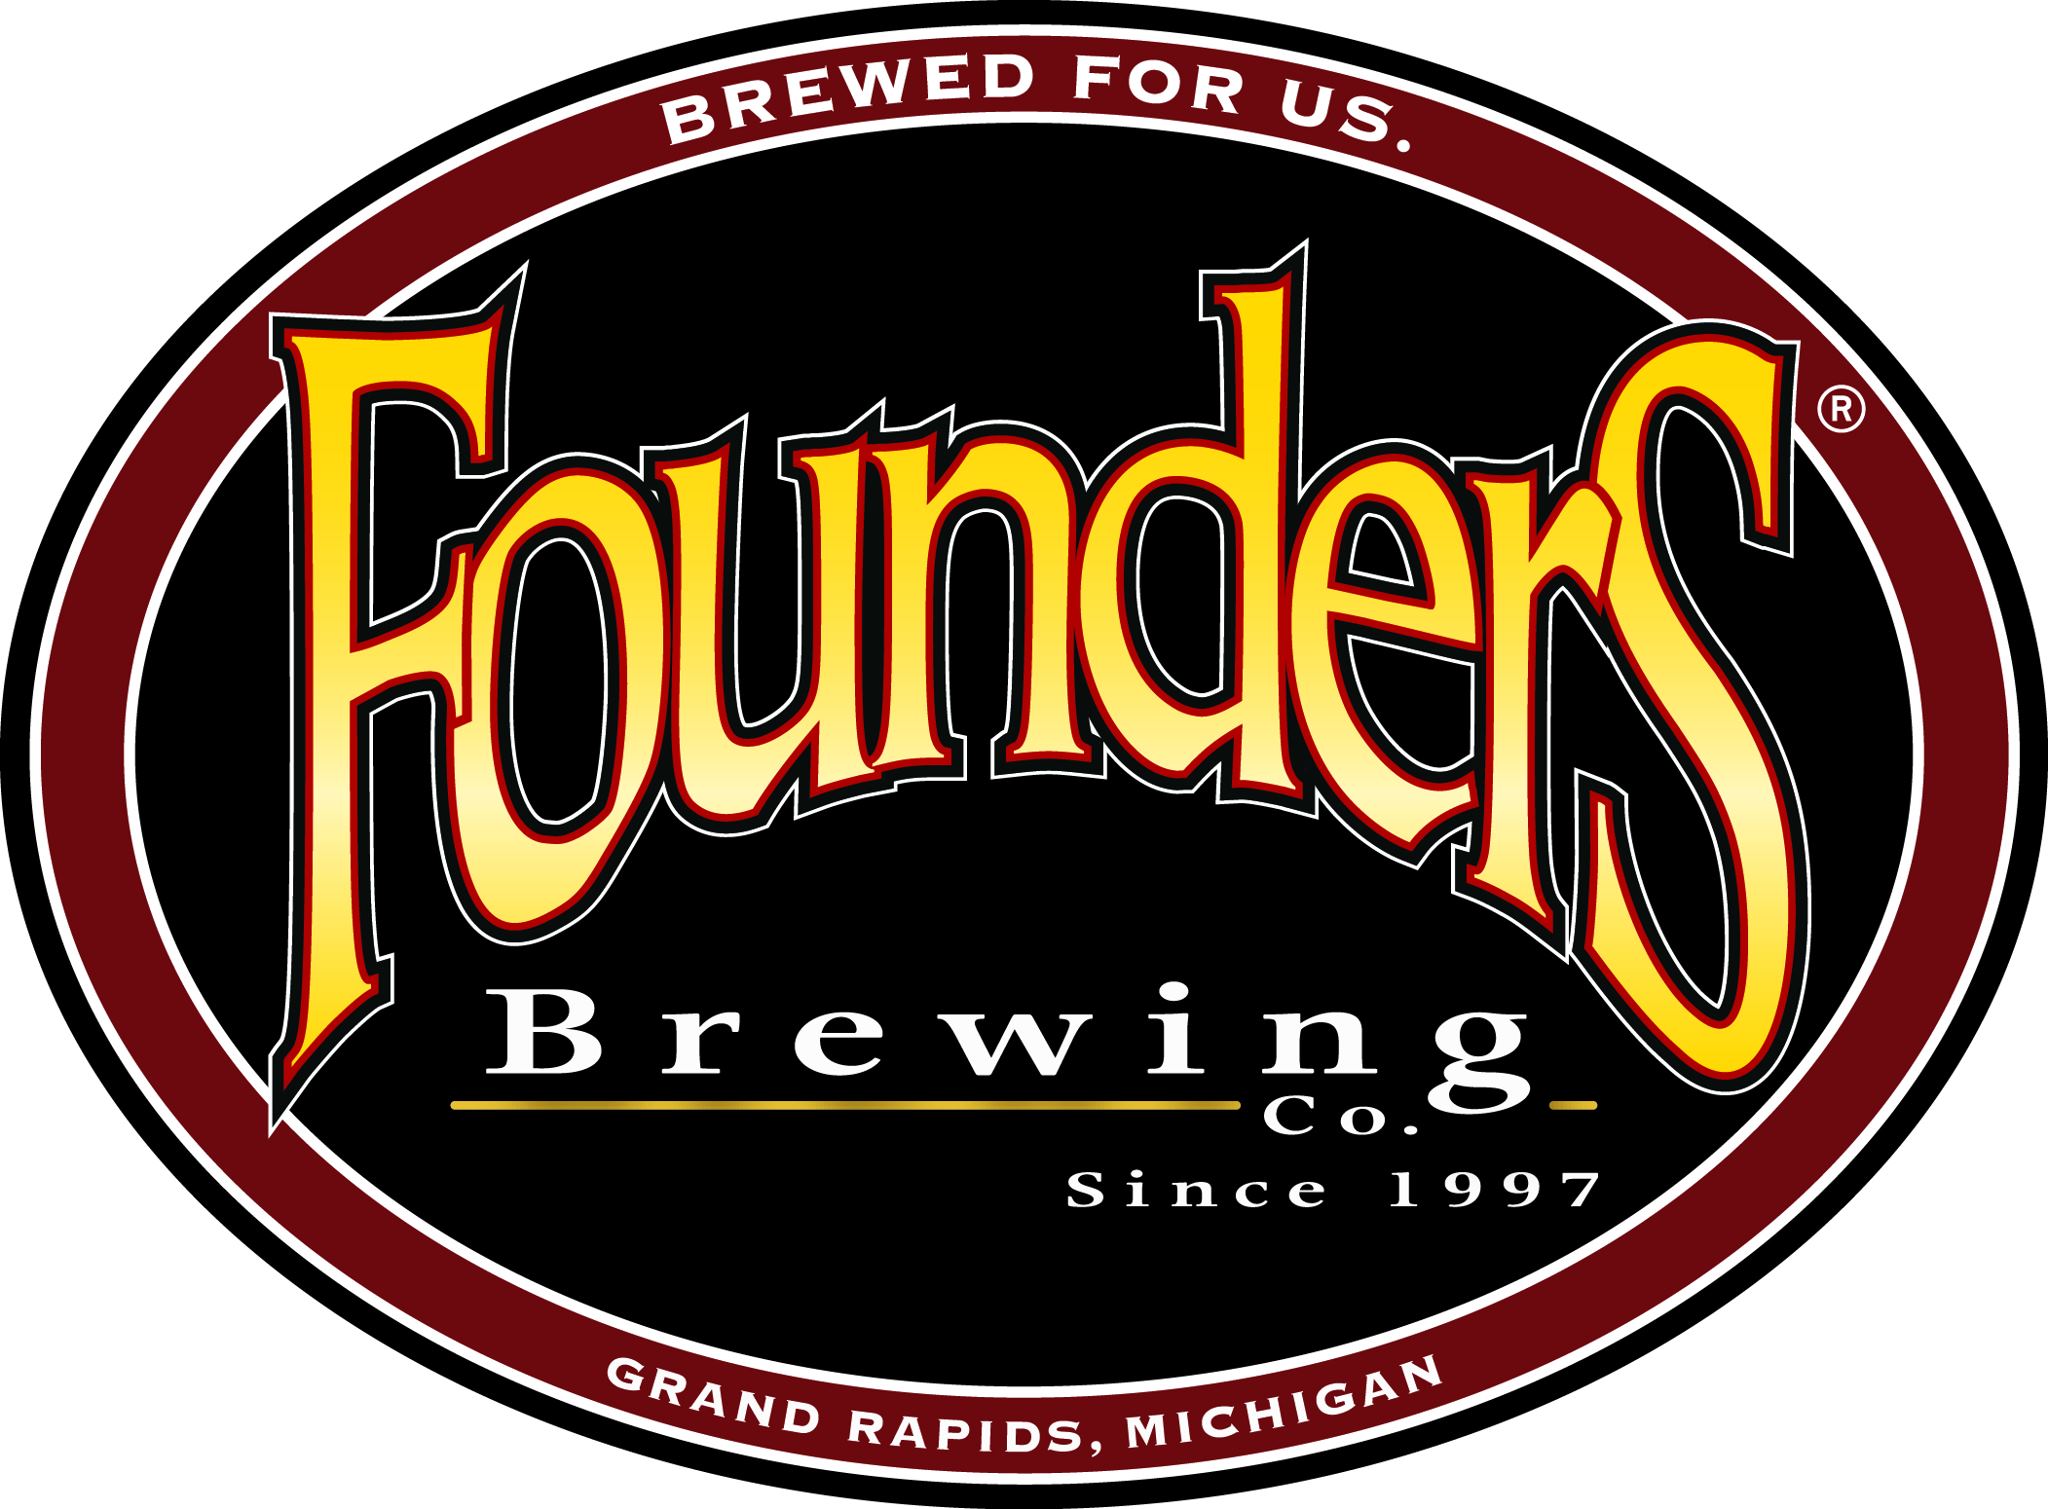 founders